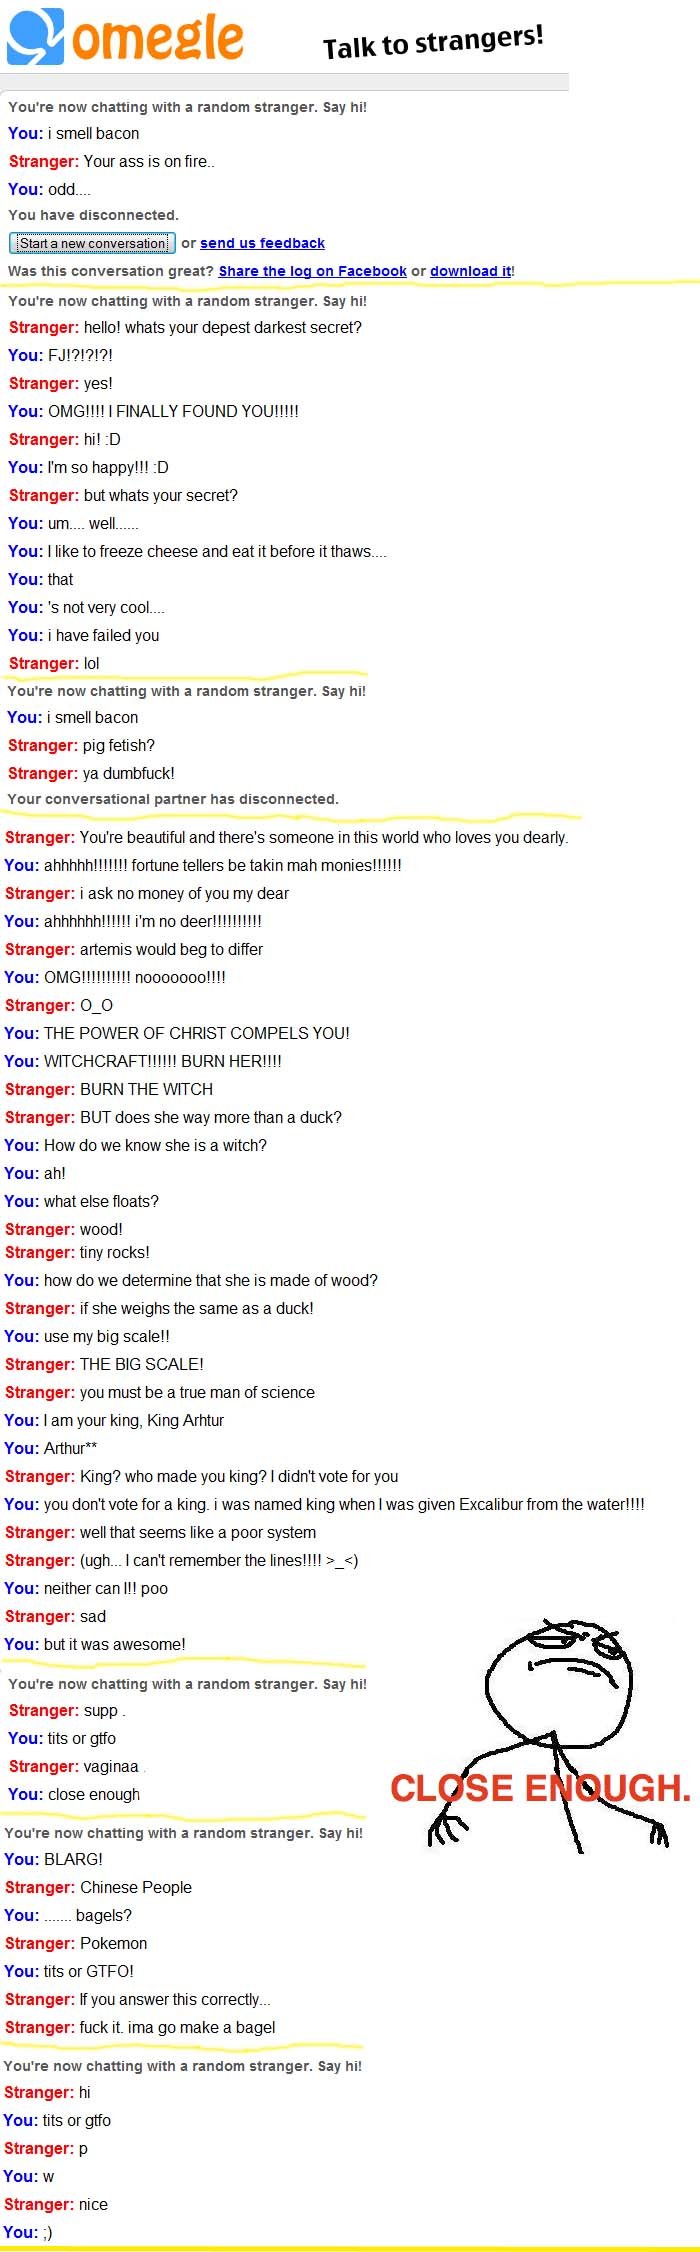 Omegle Experience